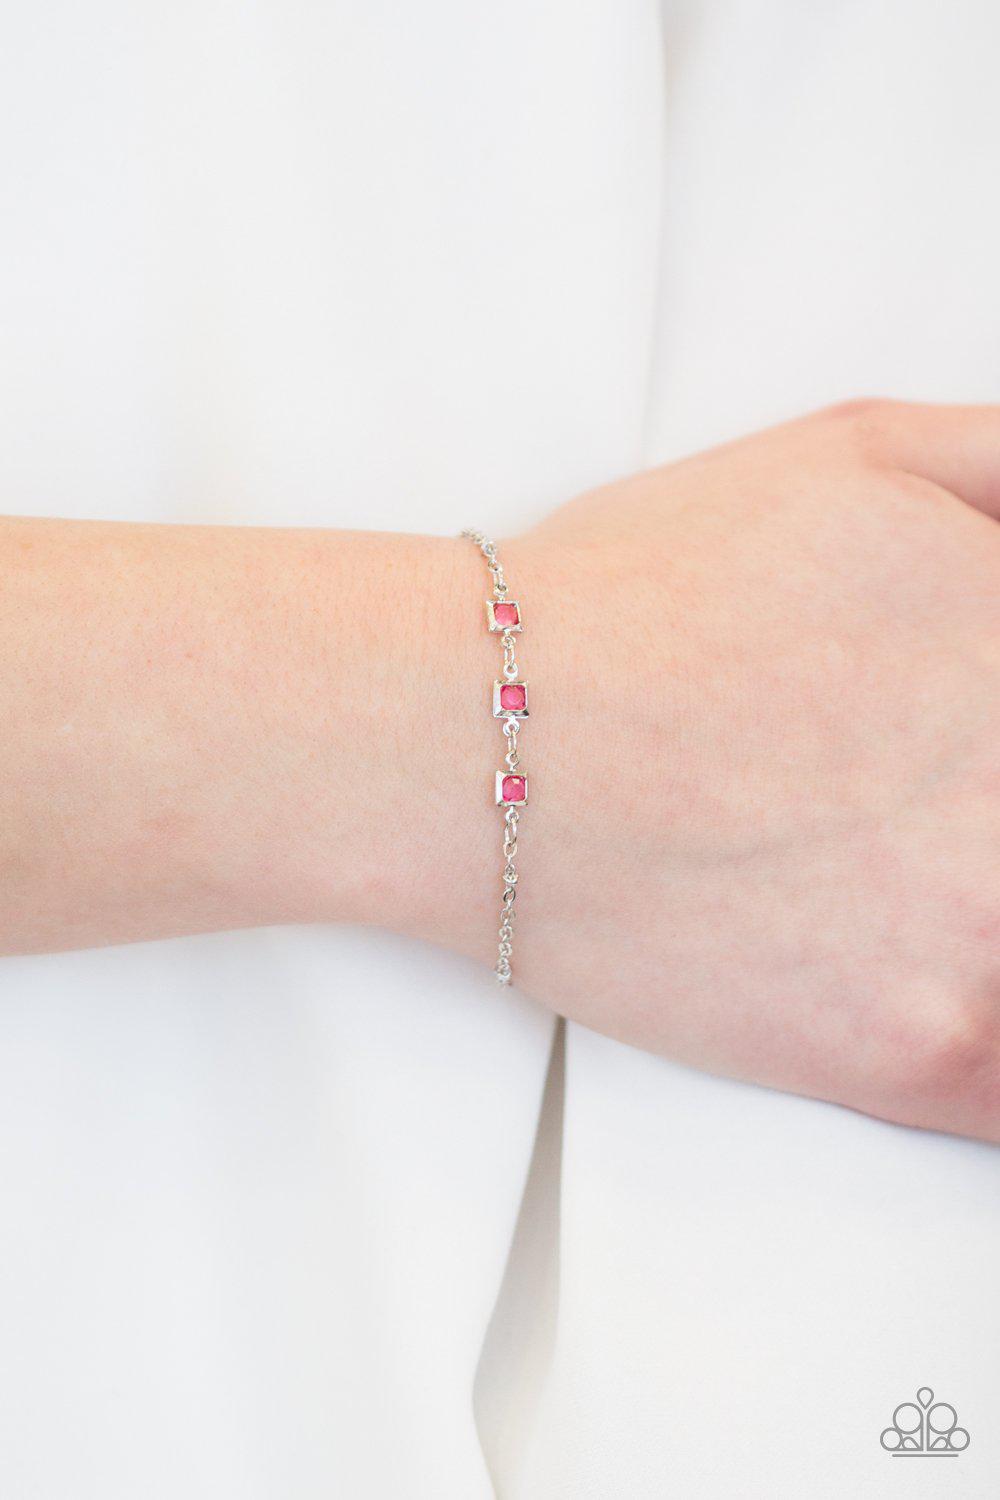 All I Have To Do Is Gleam Pink Gem Bracelet - Paparazzi Accessories-CarasShop.com - $5 Jewelry by Cara Jewels